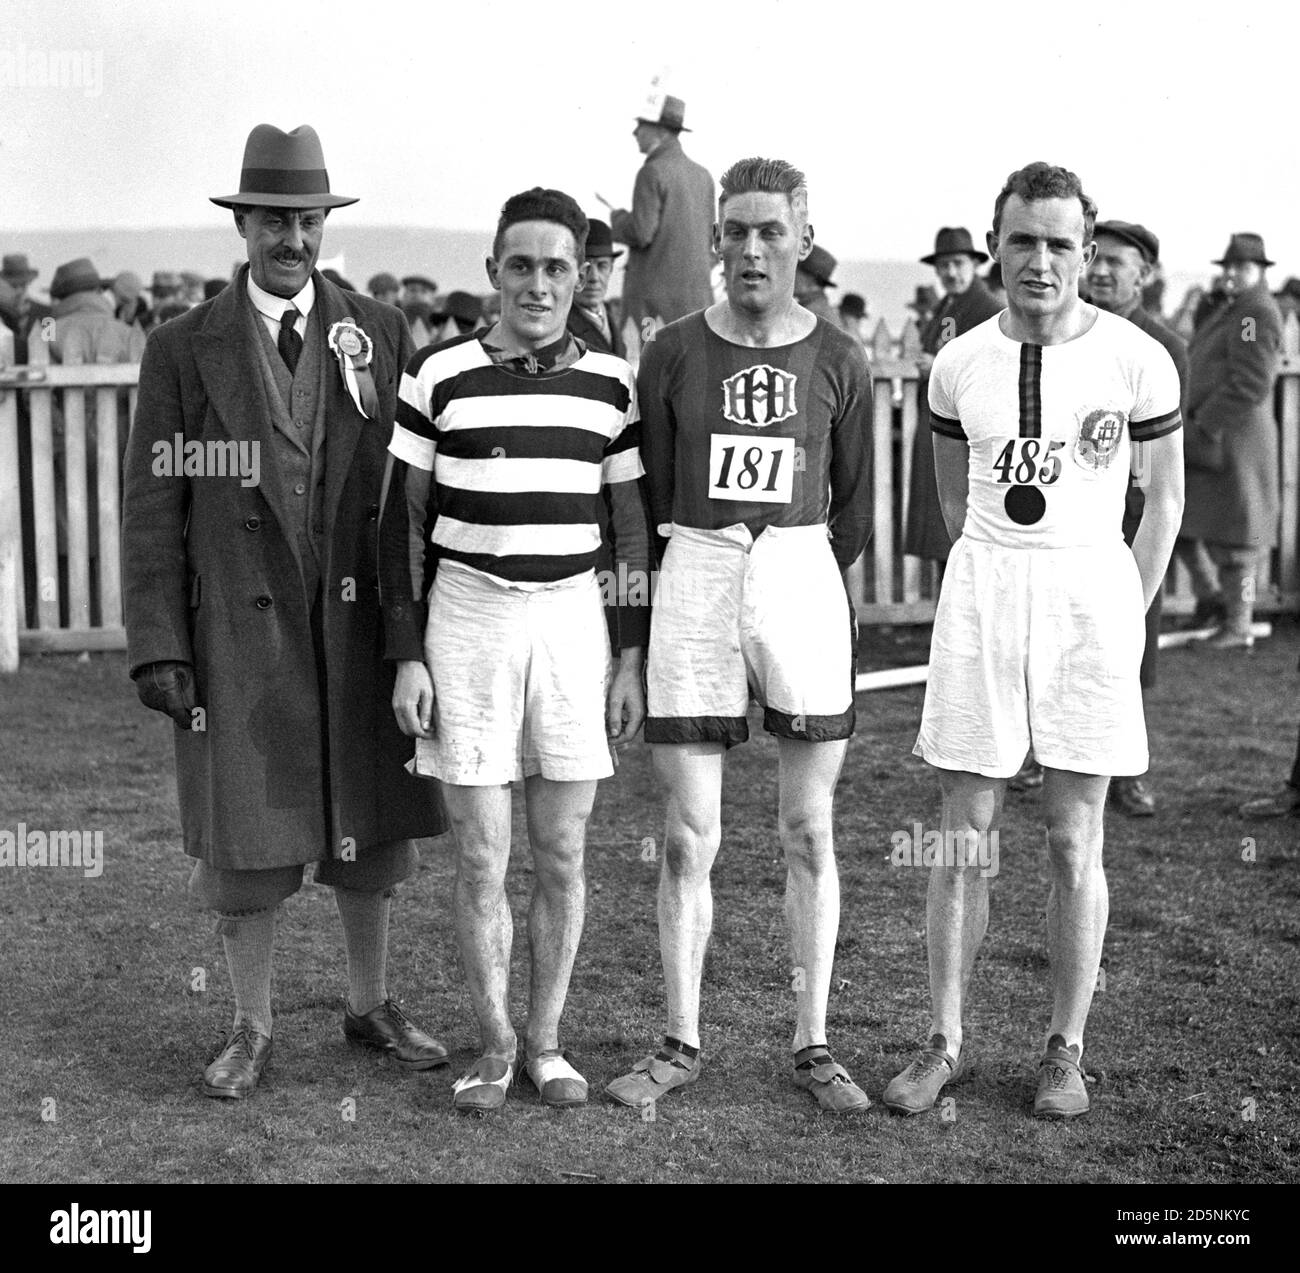 The first, second and third place finishers of the Southern Counties Ten Mile Cross Country Championship race, (L-R) S.A.Tomlin (winner), of Highgate Harriers, J.A. Broadley (second), of Hampstead Harriers, and B.C.V. Oddie (third), of South London Harriers. Stock Photo